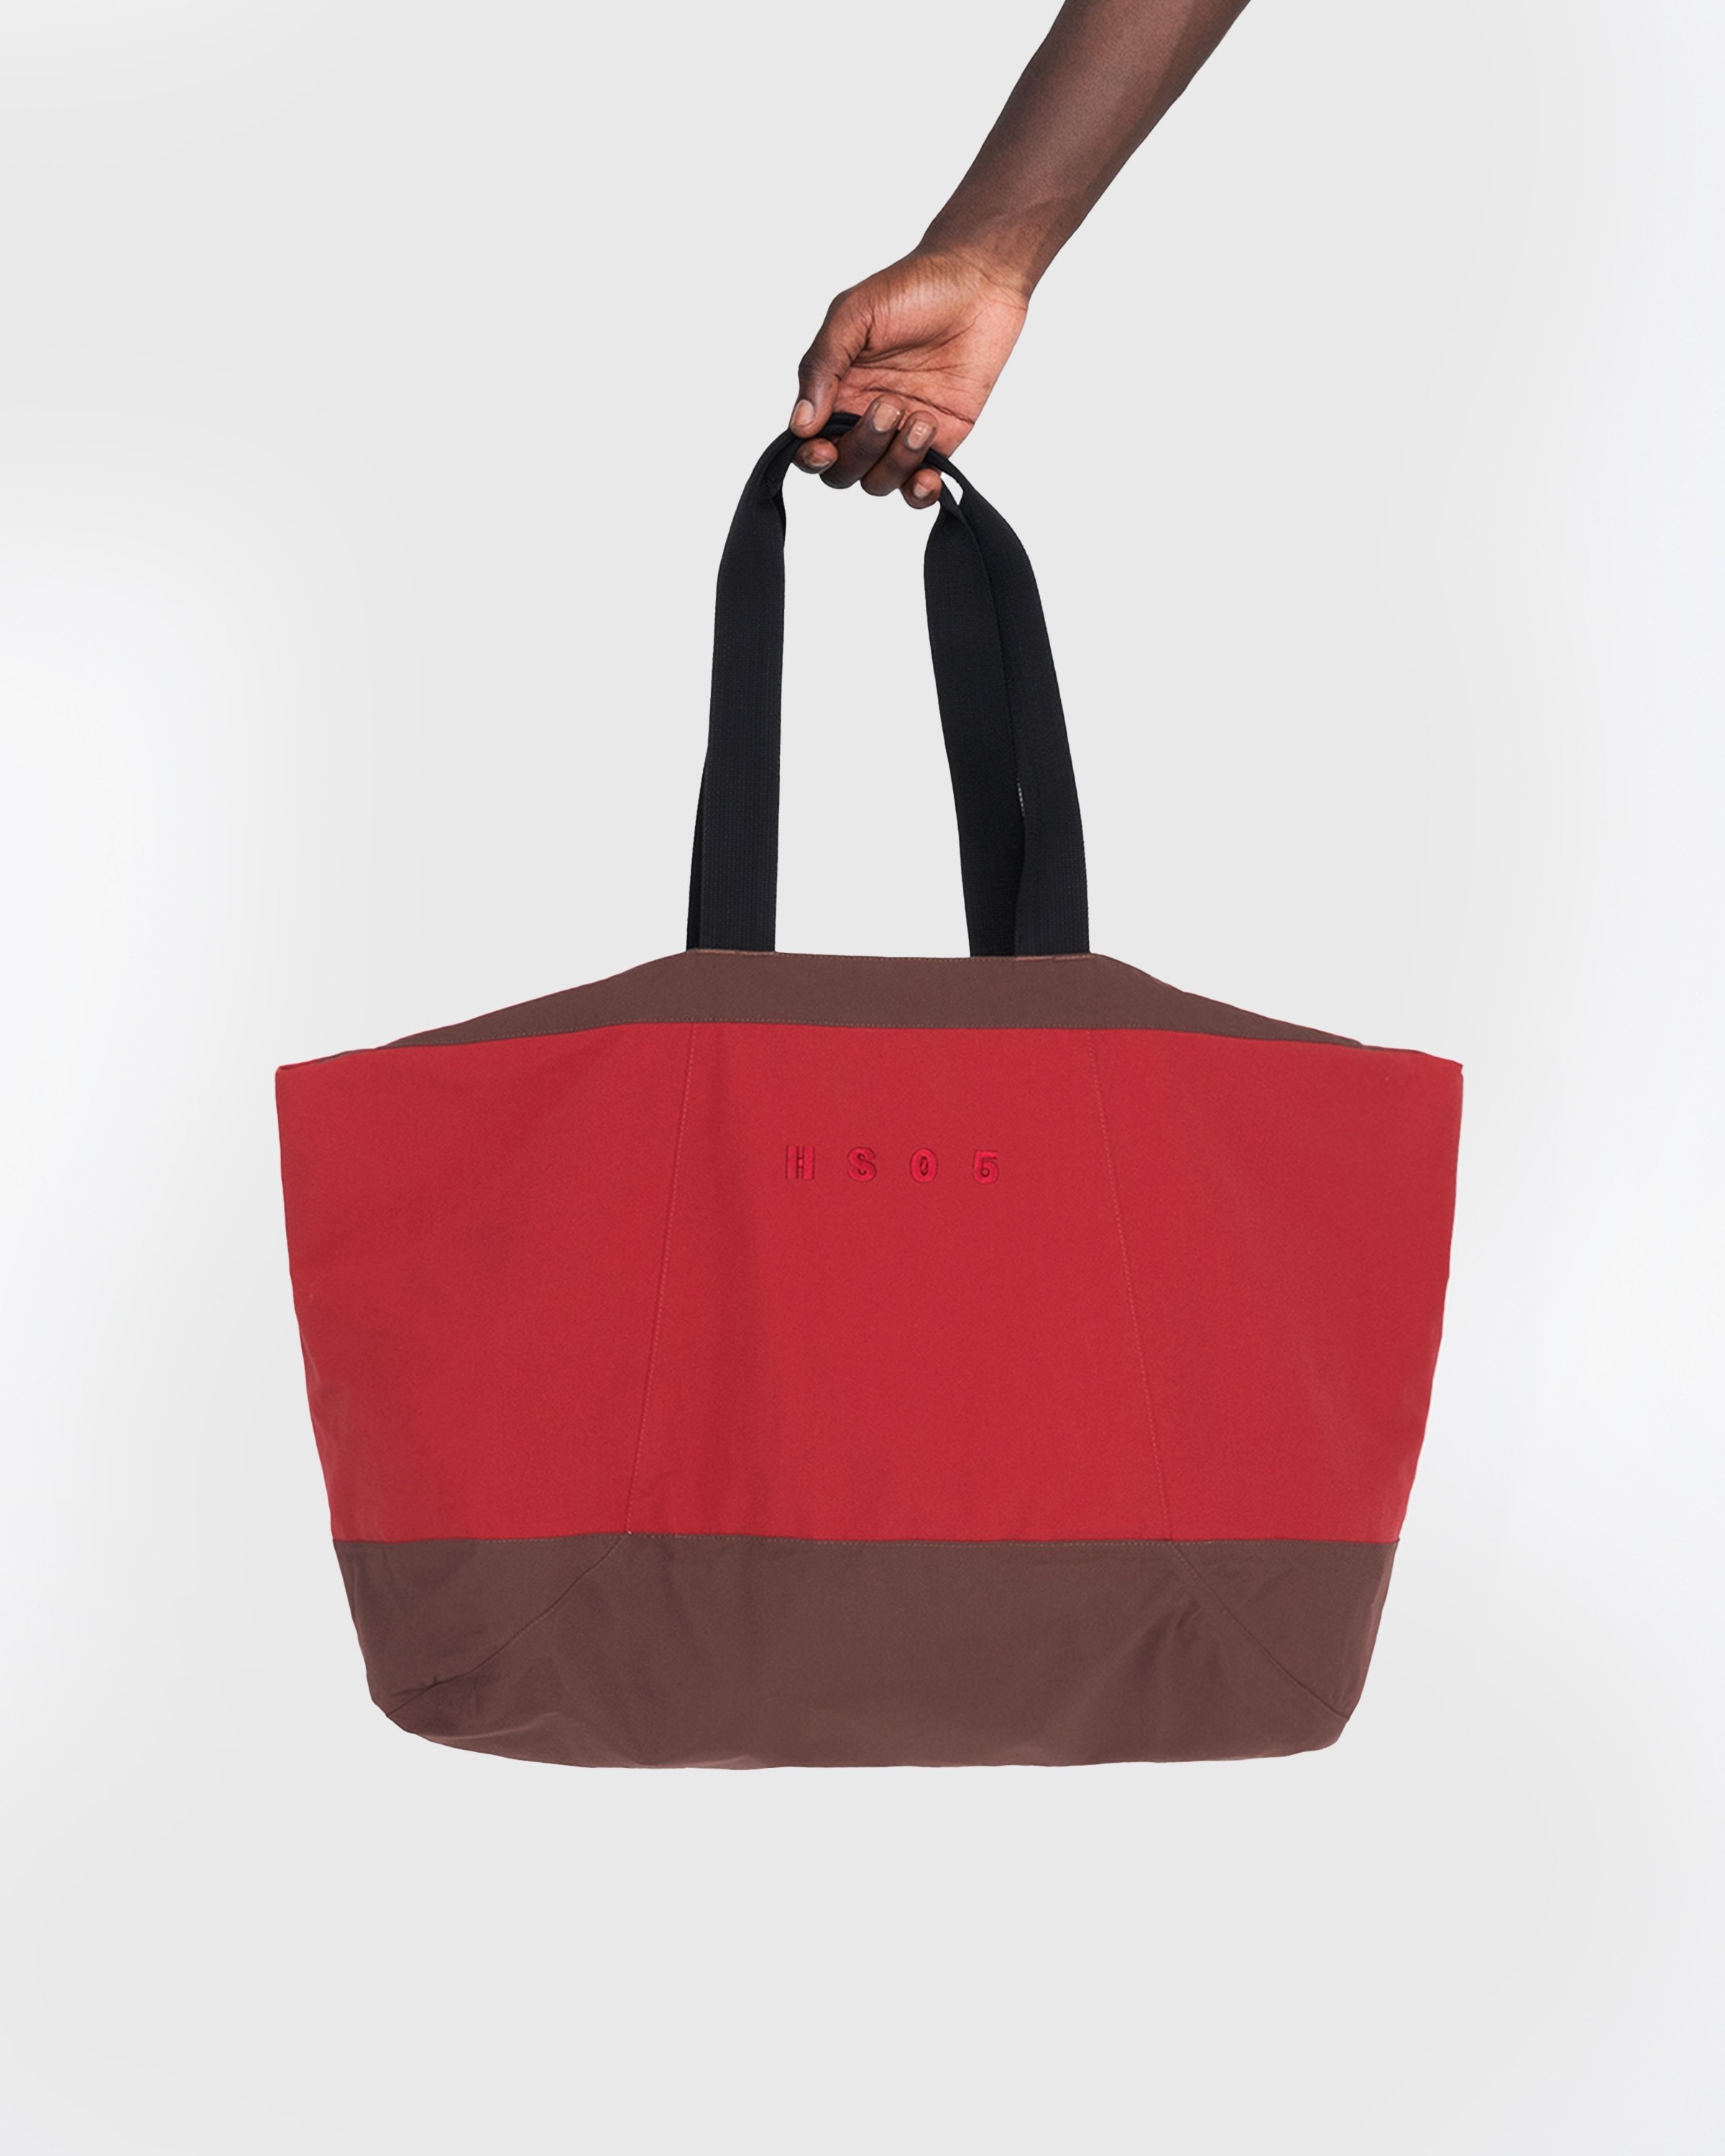 Highsnobiety HS05 – 3-Layer Nylon Tote Bag Red - Bags - Red - Image 3